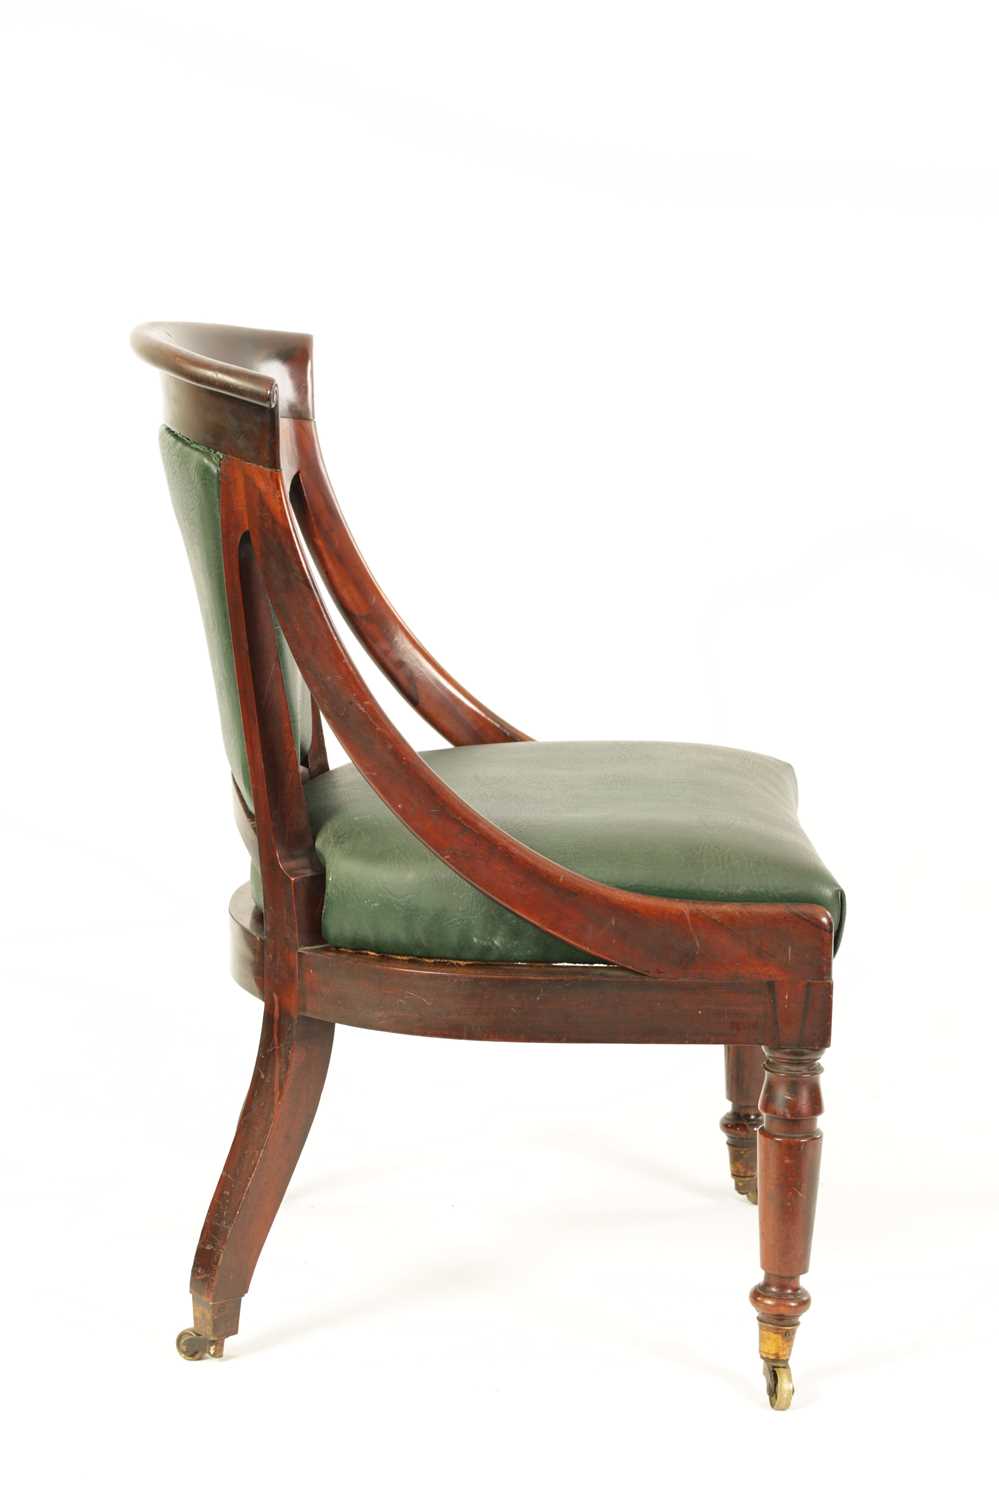 AN UNUSUAL REGENCY GONÇALO-ALVES TIMBER LIBRARY CHAIR IN THE MANNER OF GILLOWS - Image 6 of 7